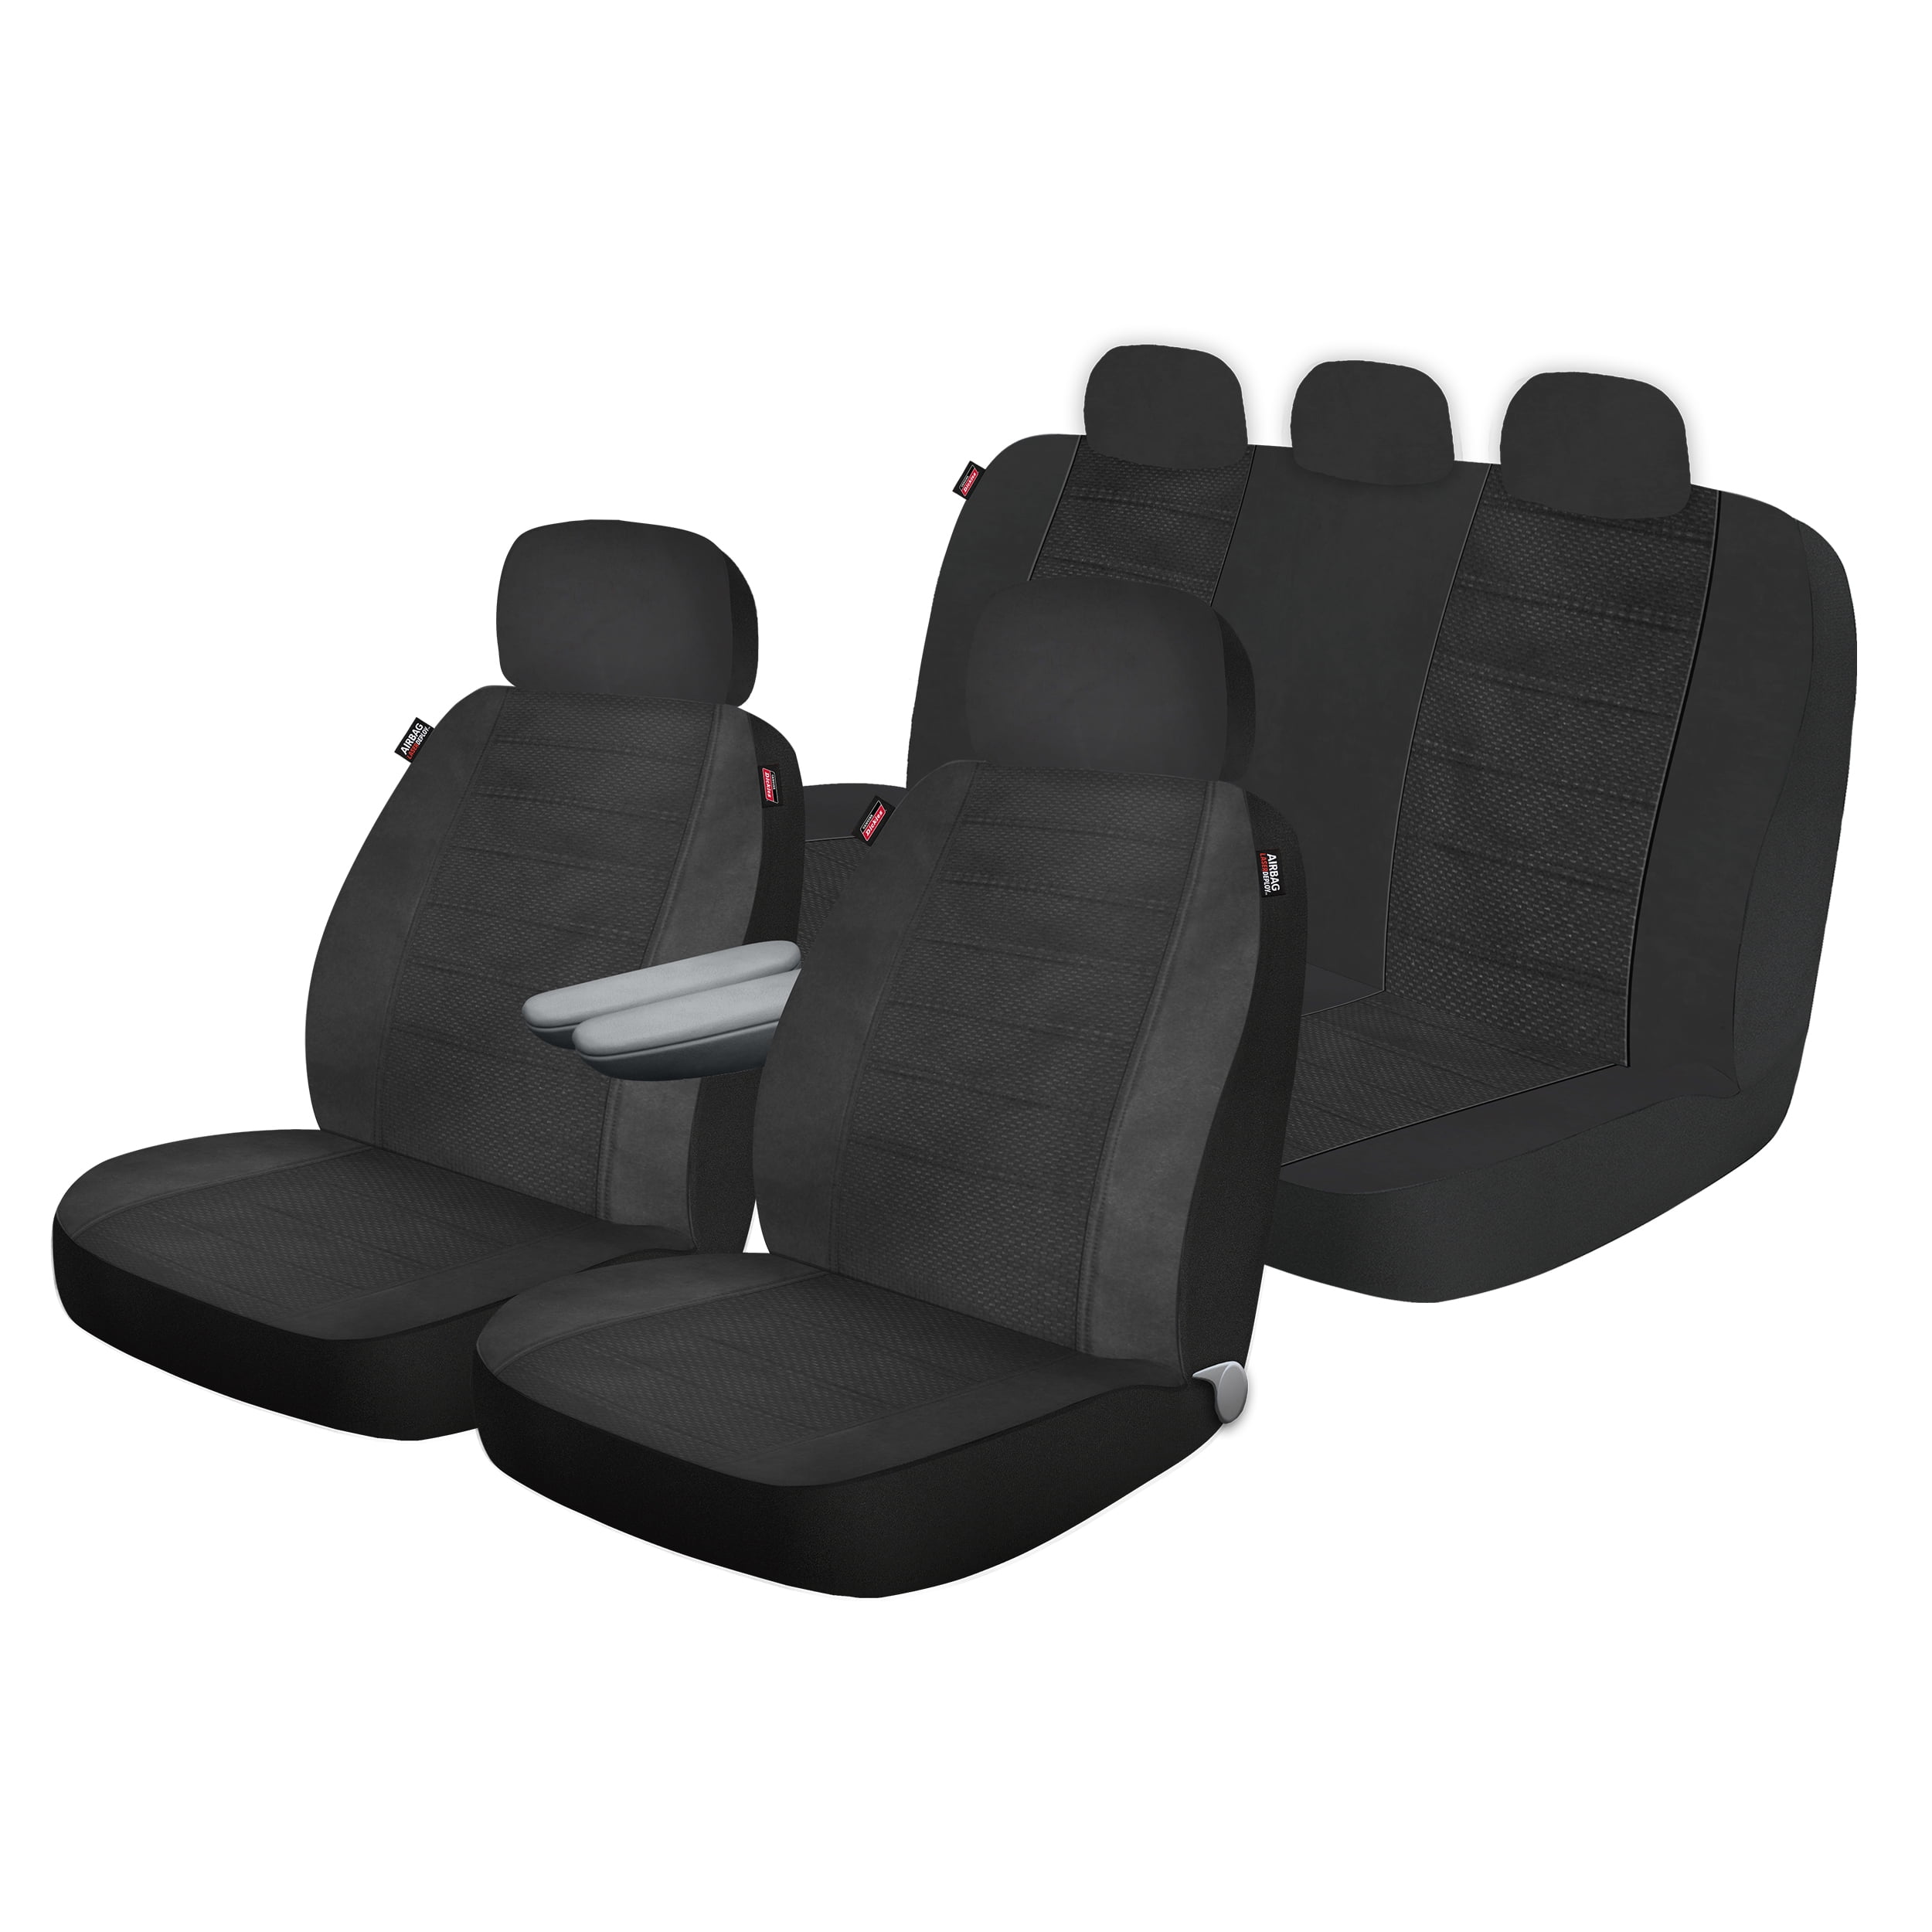 New Black with Red Trim Fabric Interior Protection Low Back Car Seat Covers Set 